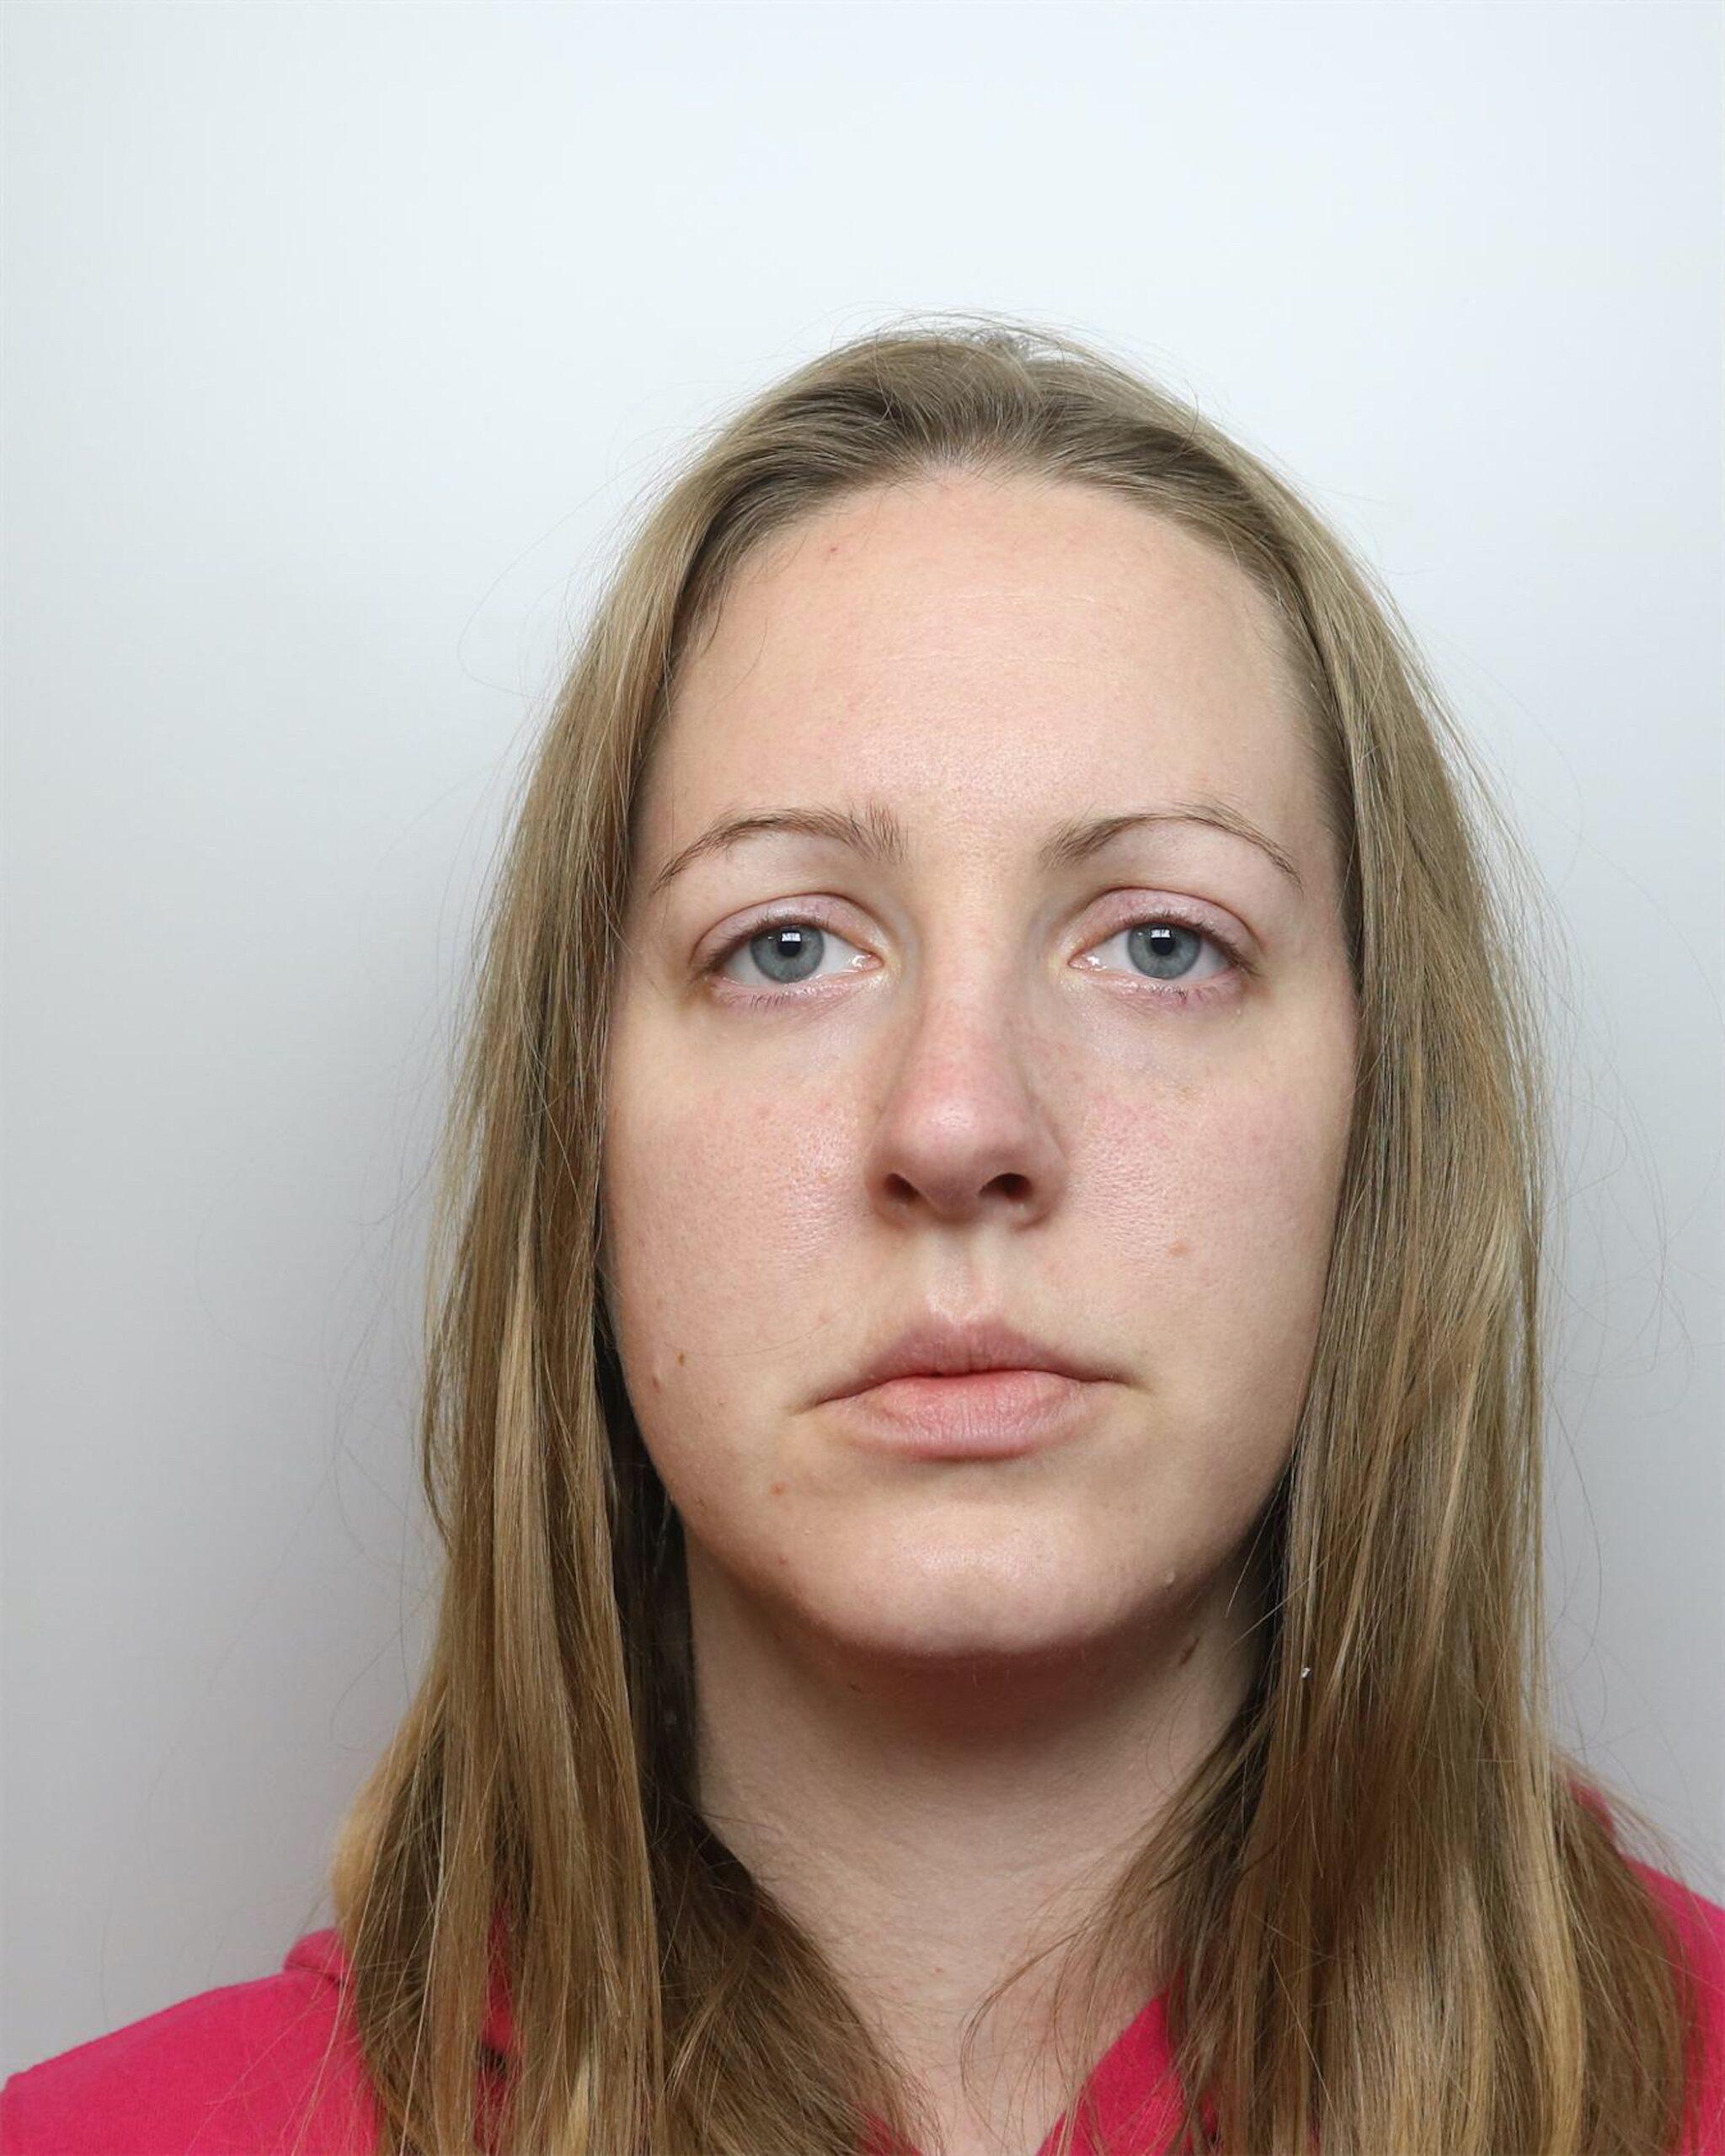 Nurse Lucy Letby has been found guilty of murdering seven babies on a neonatal unit, making her the UK's most prolific child serial killer in modern times., The 33-year-old has also been convicted of trying to kill six other infants at the Countess of Chester Hospital between June 2015 and June 2016., Letby deliberately injected babies with air, force fed others milk and poisoned two of the infants with insulin., She refused to appear in the dock for the latest verdicts. She is pictured here in a police booking / custody photo taken in November 2020 by Cheshire Police., Editorial usage. 18 Aug 2023 Pictured: Nurse Lucy Letby. Photo credit: Cheshire Police/MEGA 